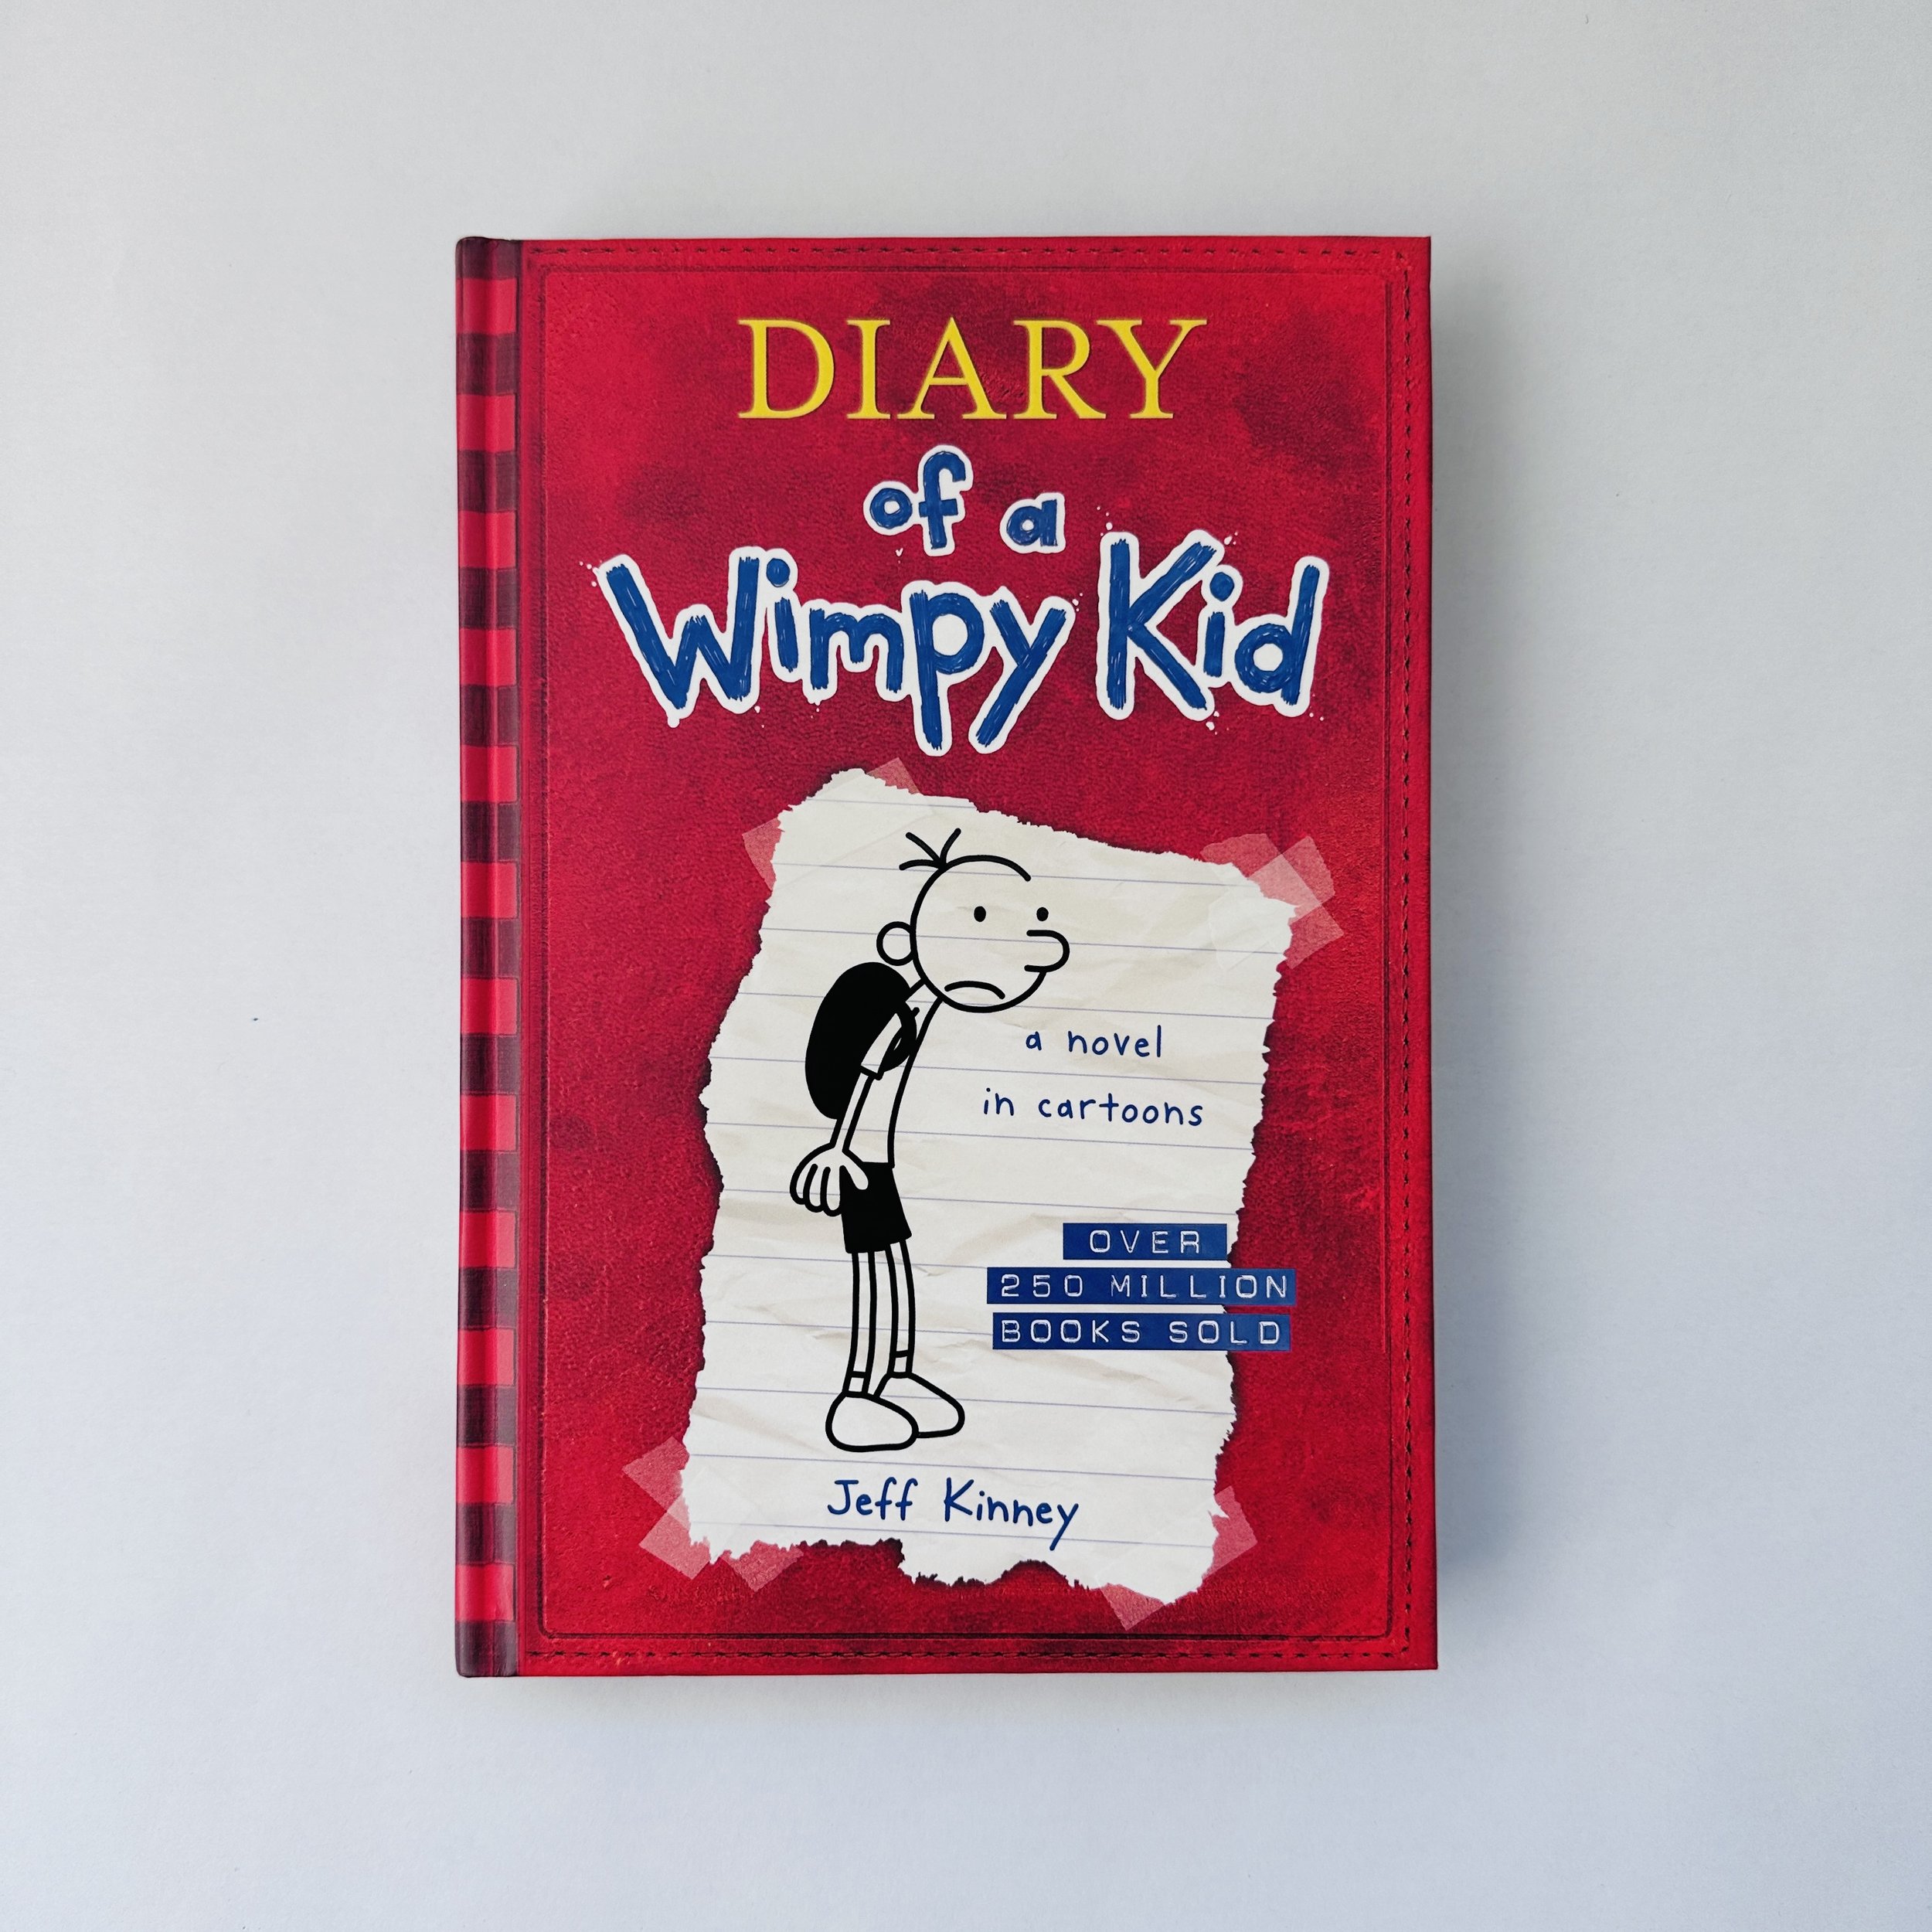 Diary of a Wimpy Kid.jpg